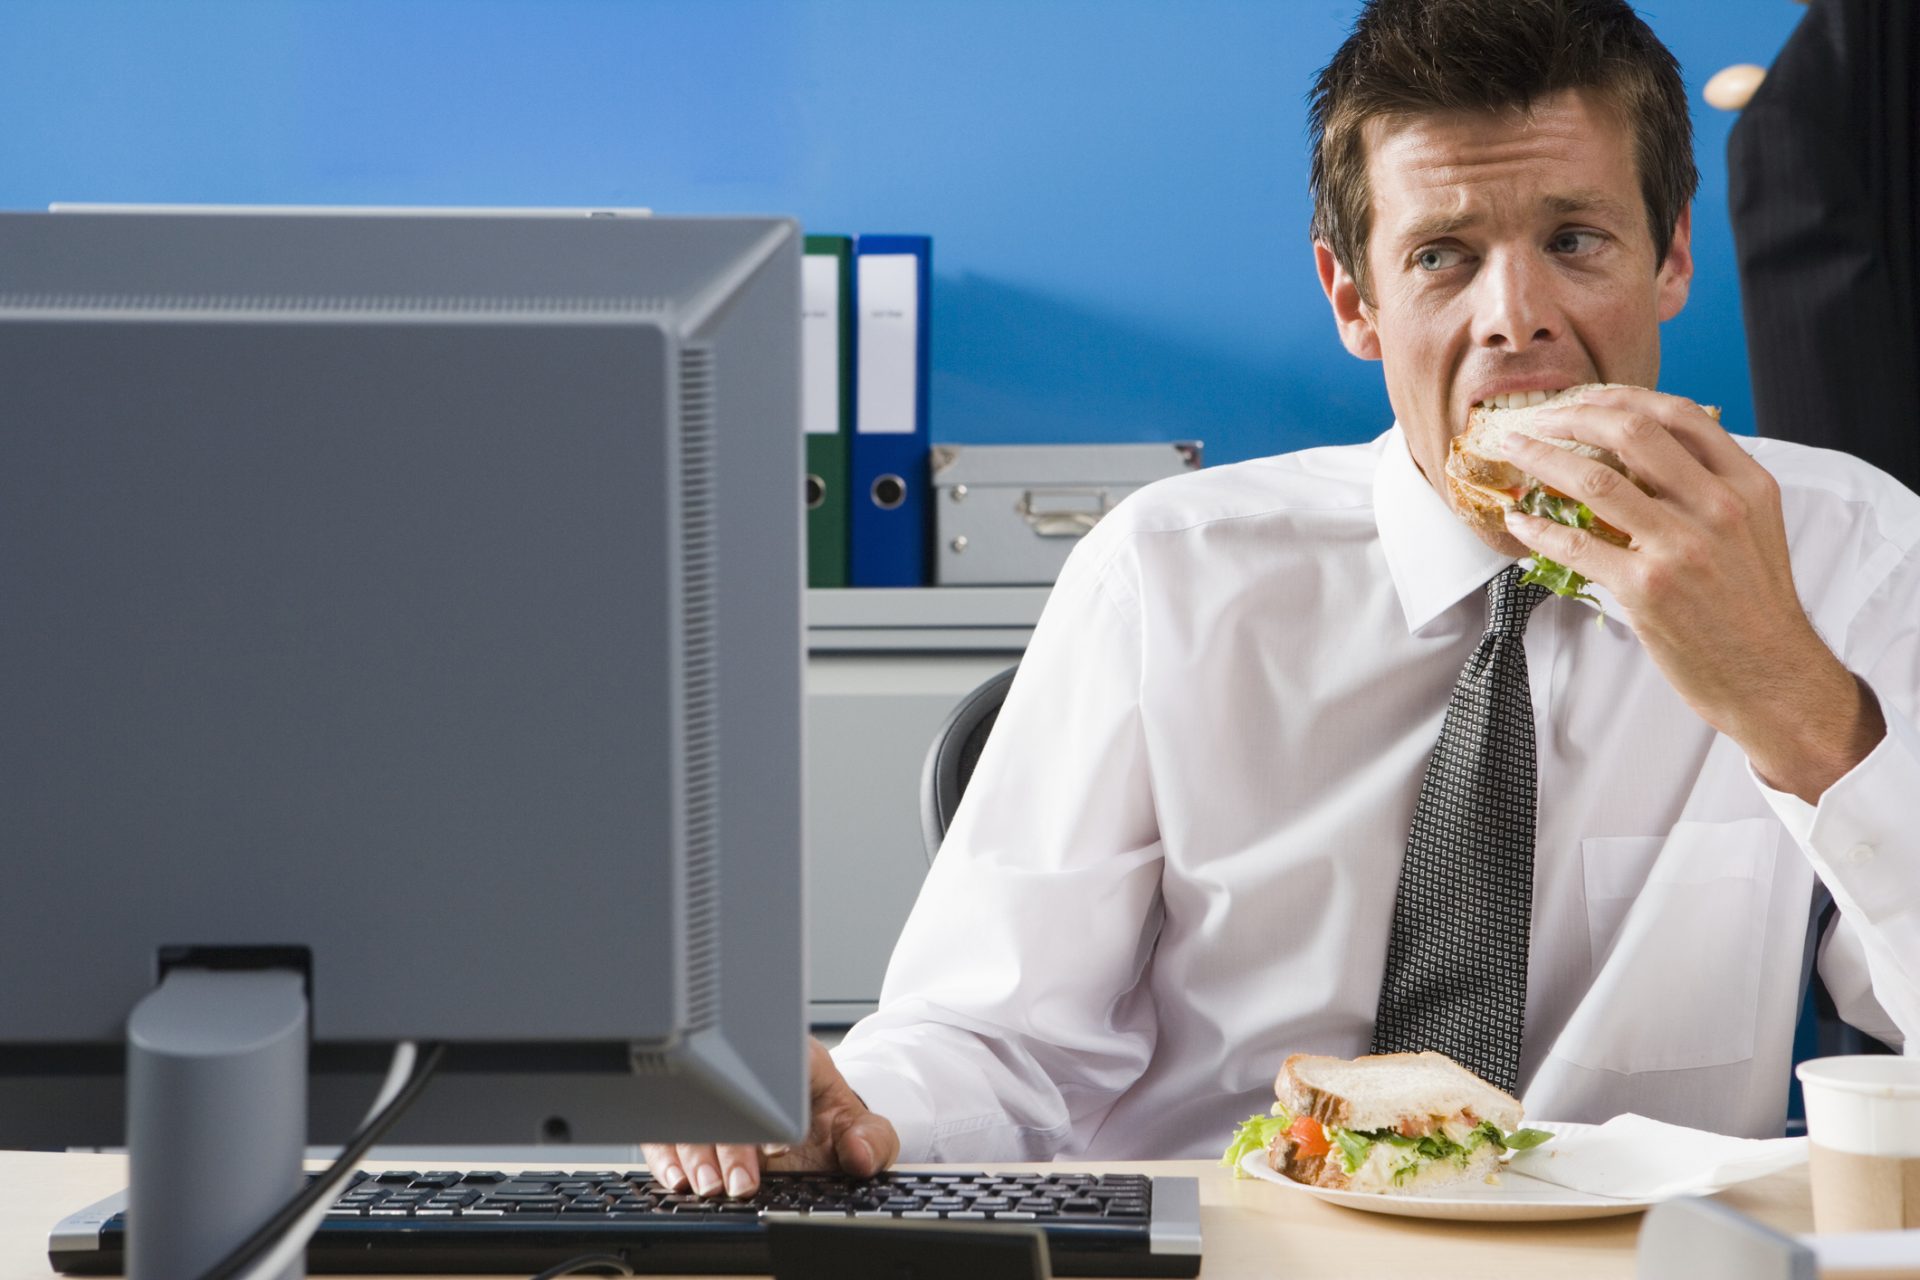 4 out of 5 US workers eat lunch at their desk